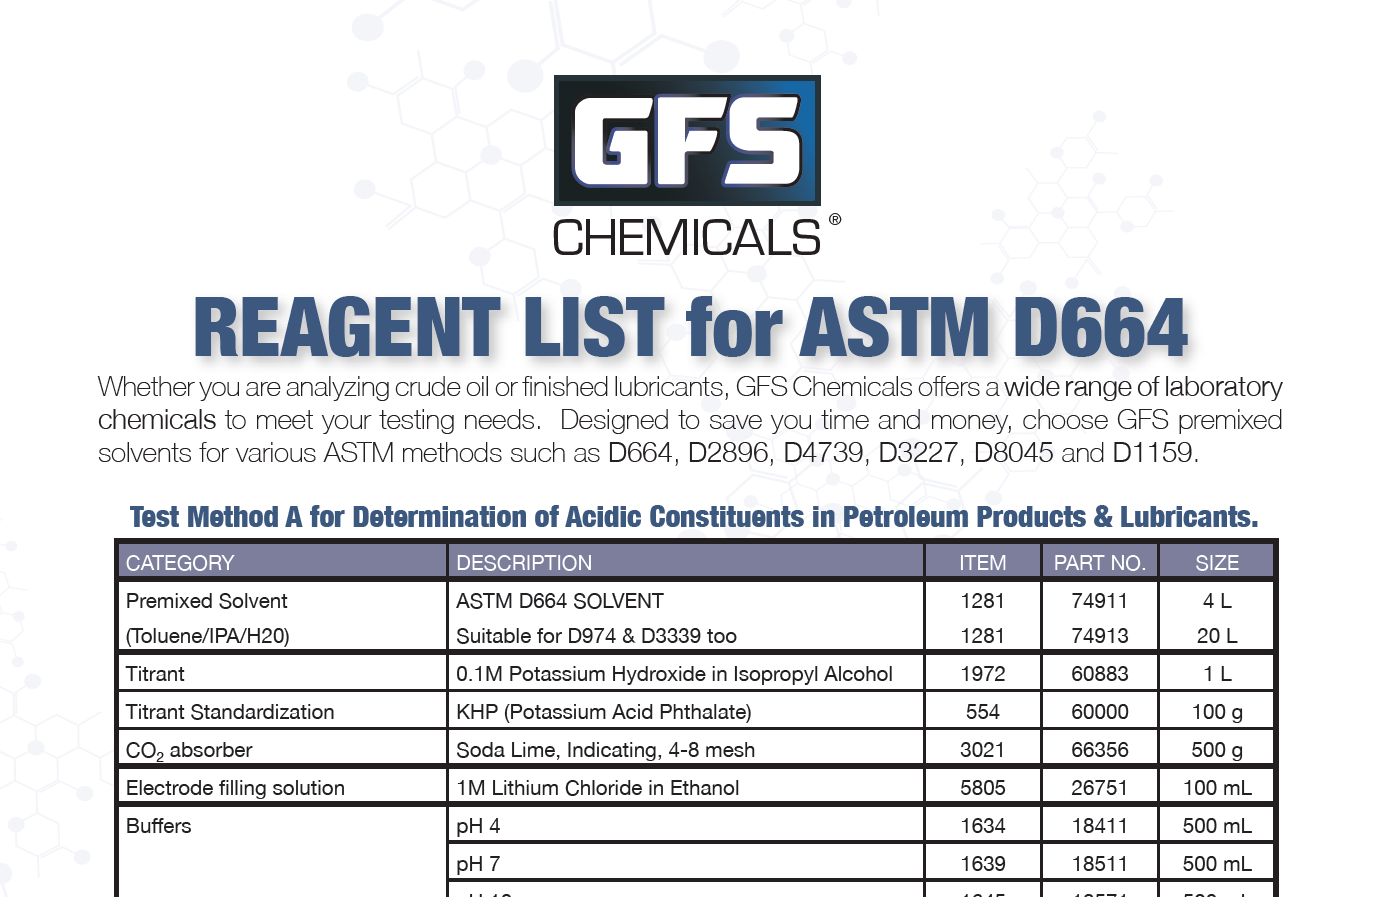 Reagents List for ASTM D664